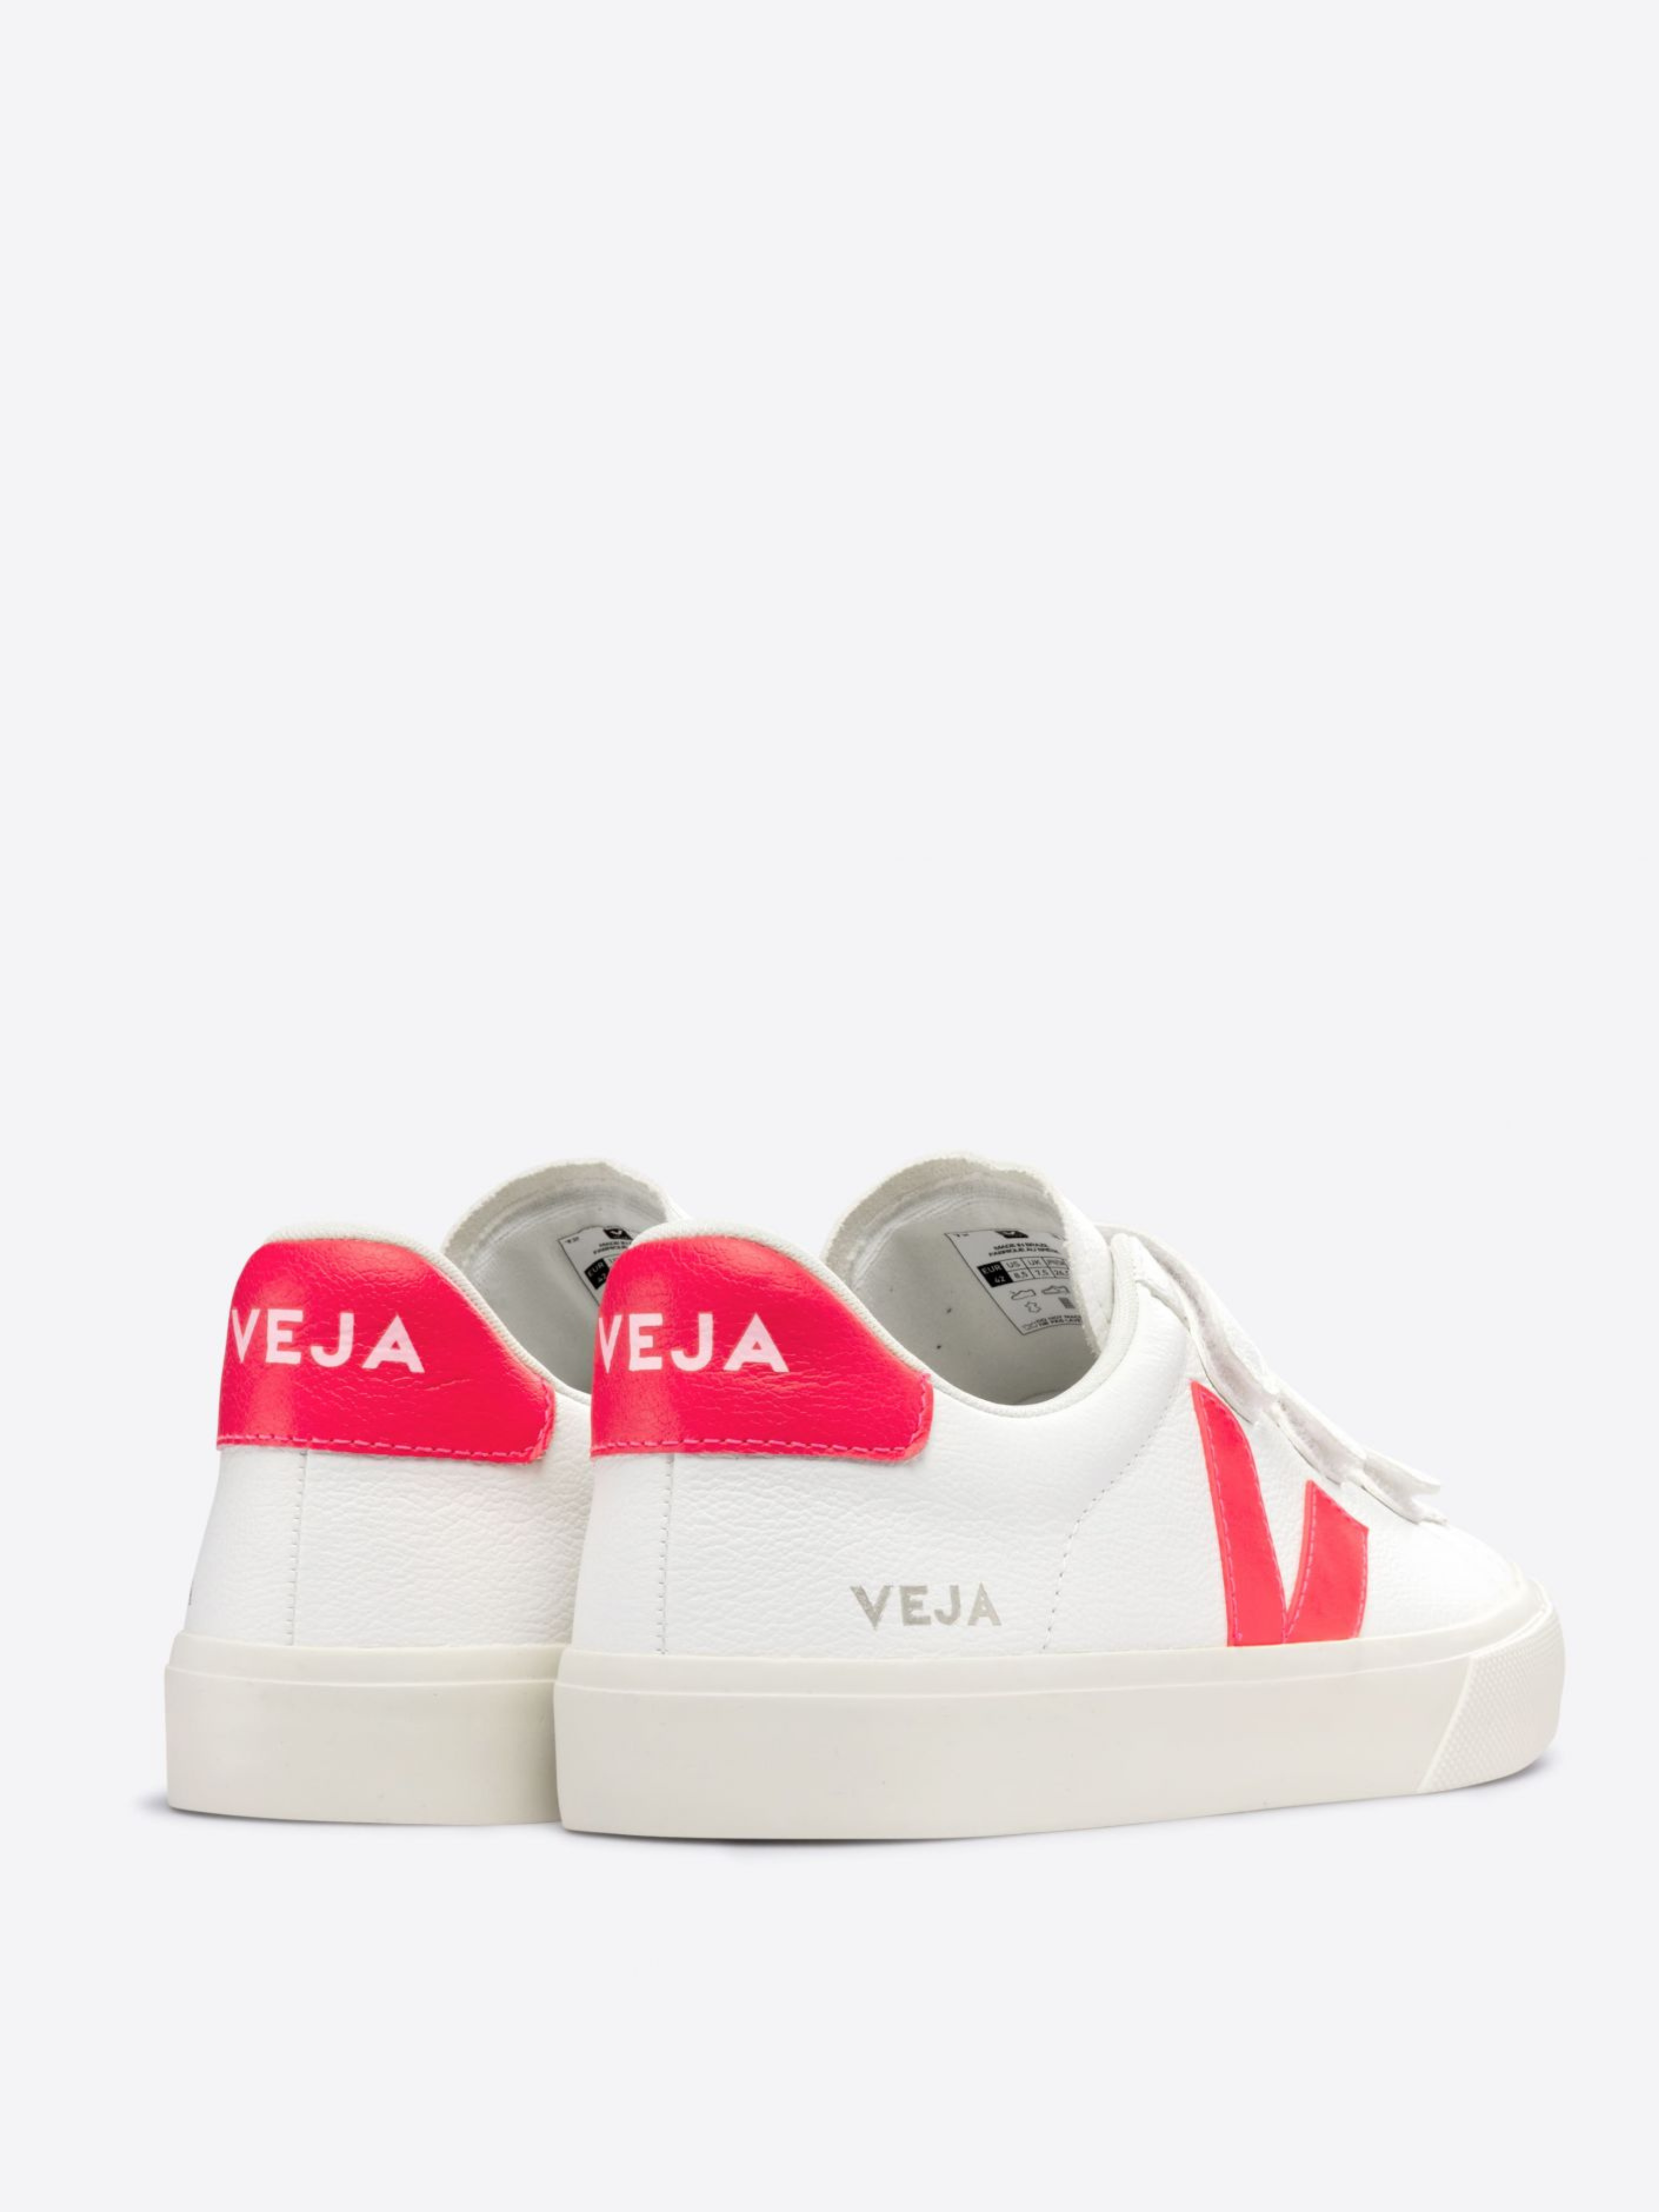 VEJA, 'Recife' Velcro Strap Leather Low Top Sneakers